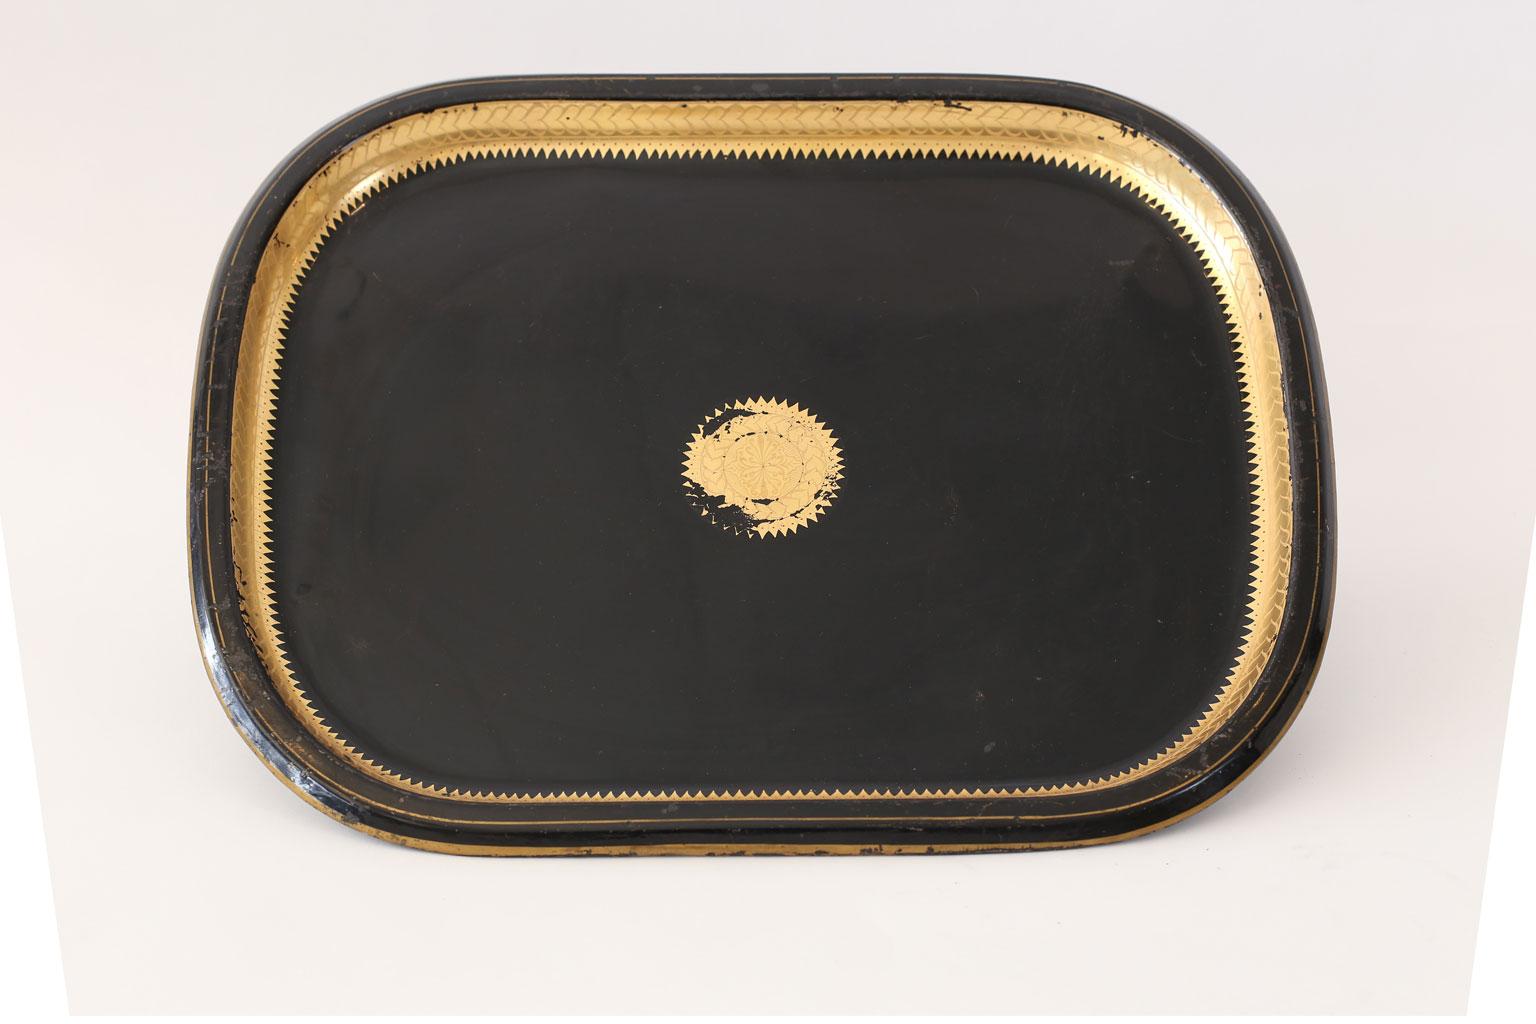 Italian gilded and ebonized tole tray dating to the early 19th century. Decorated in gilding and painted black.